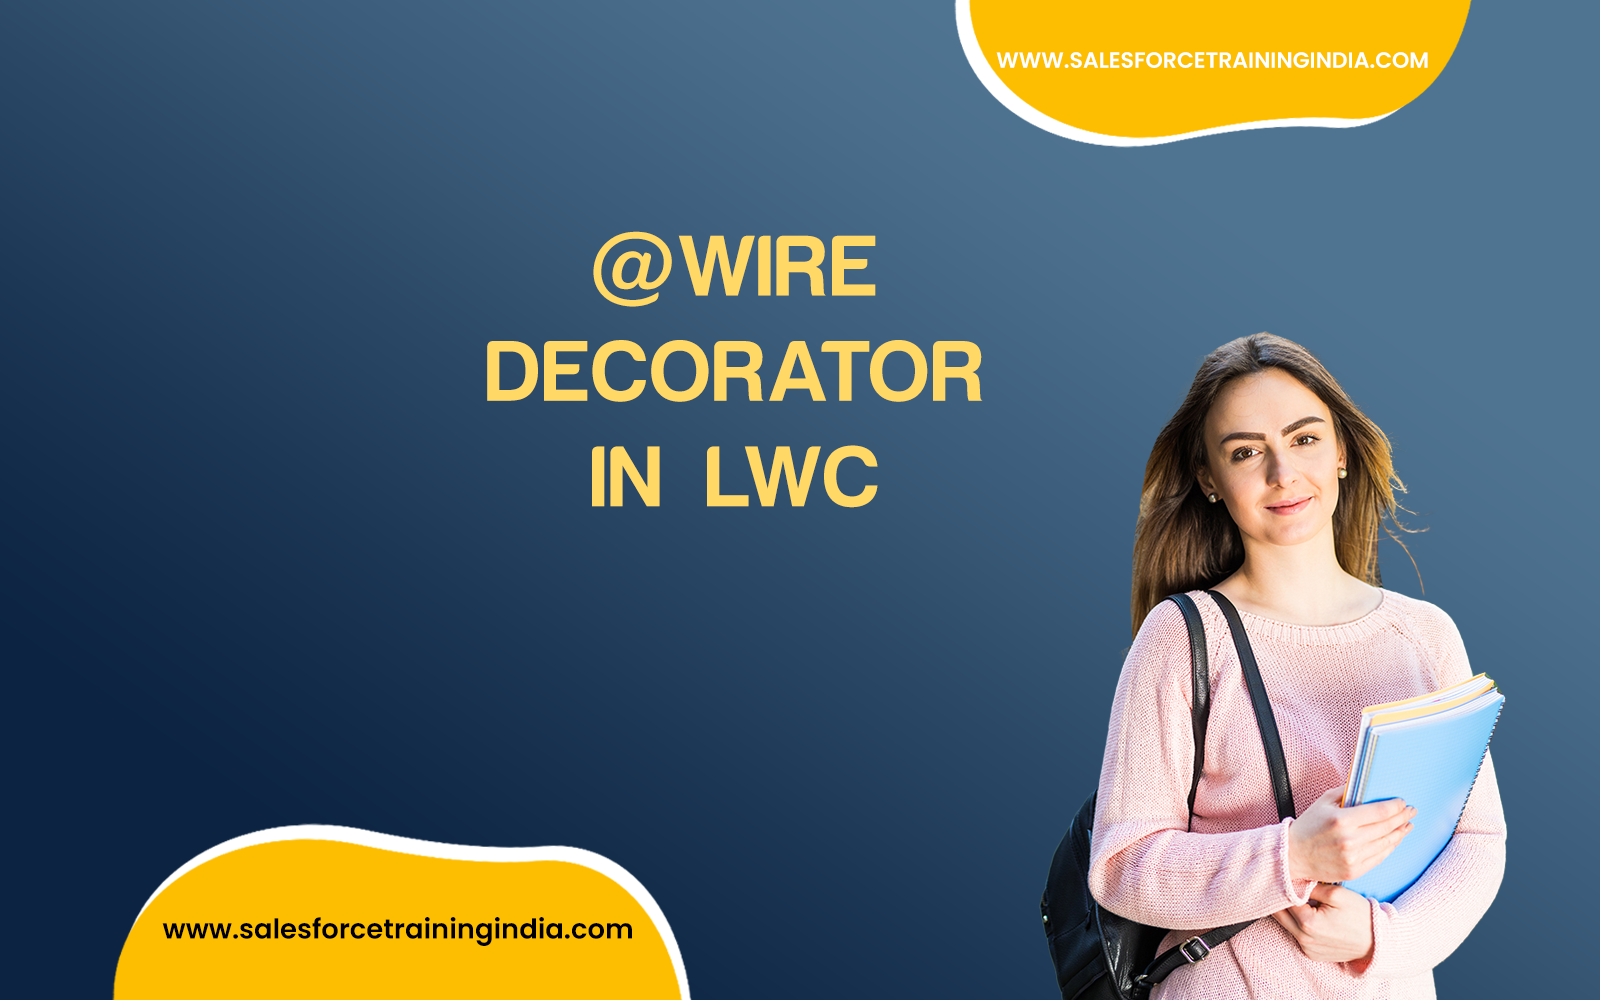 @wire decorator in LWC